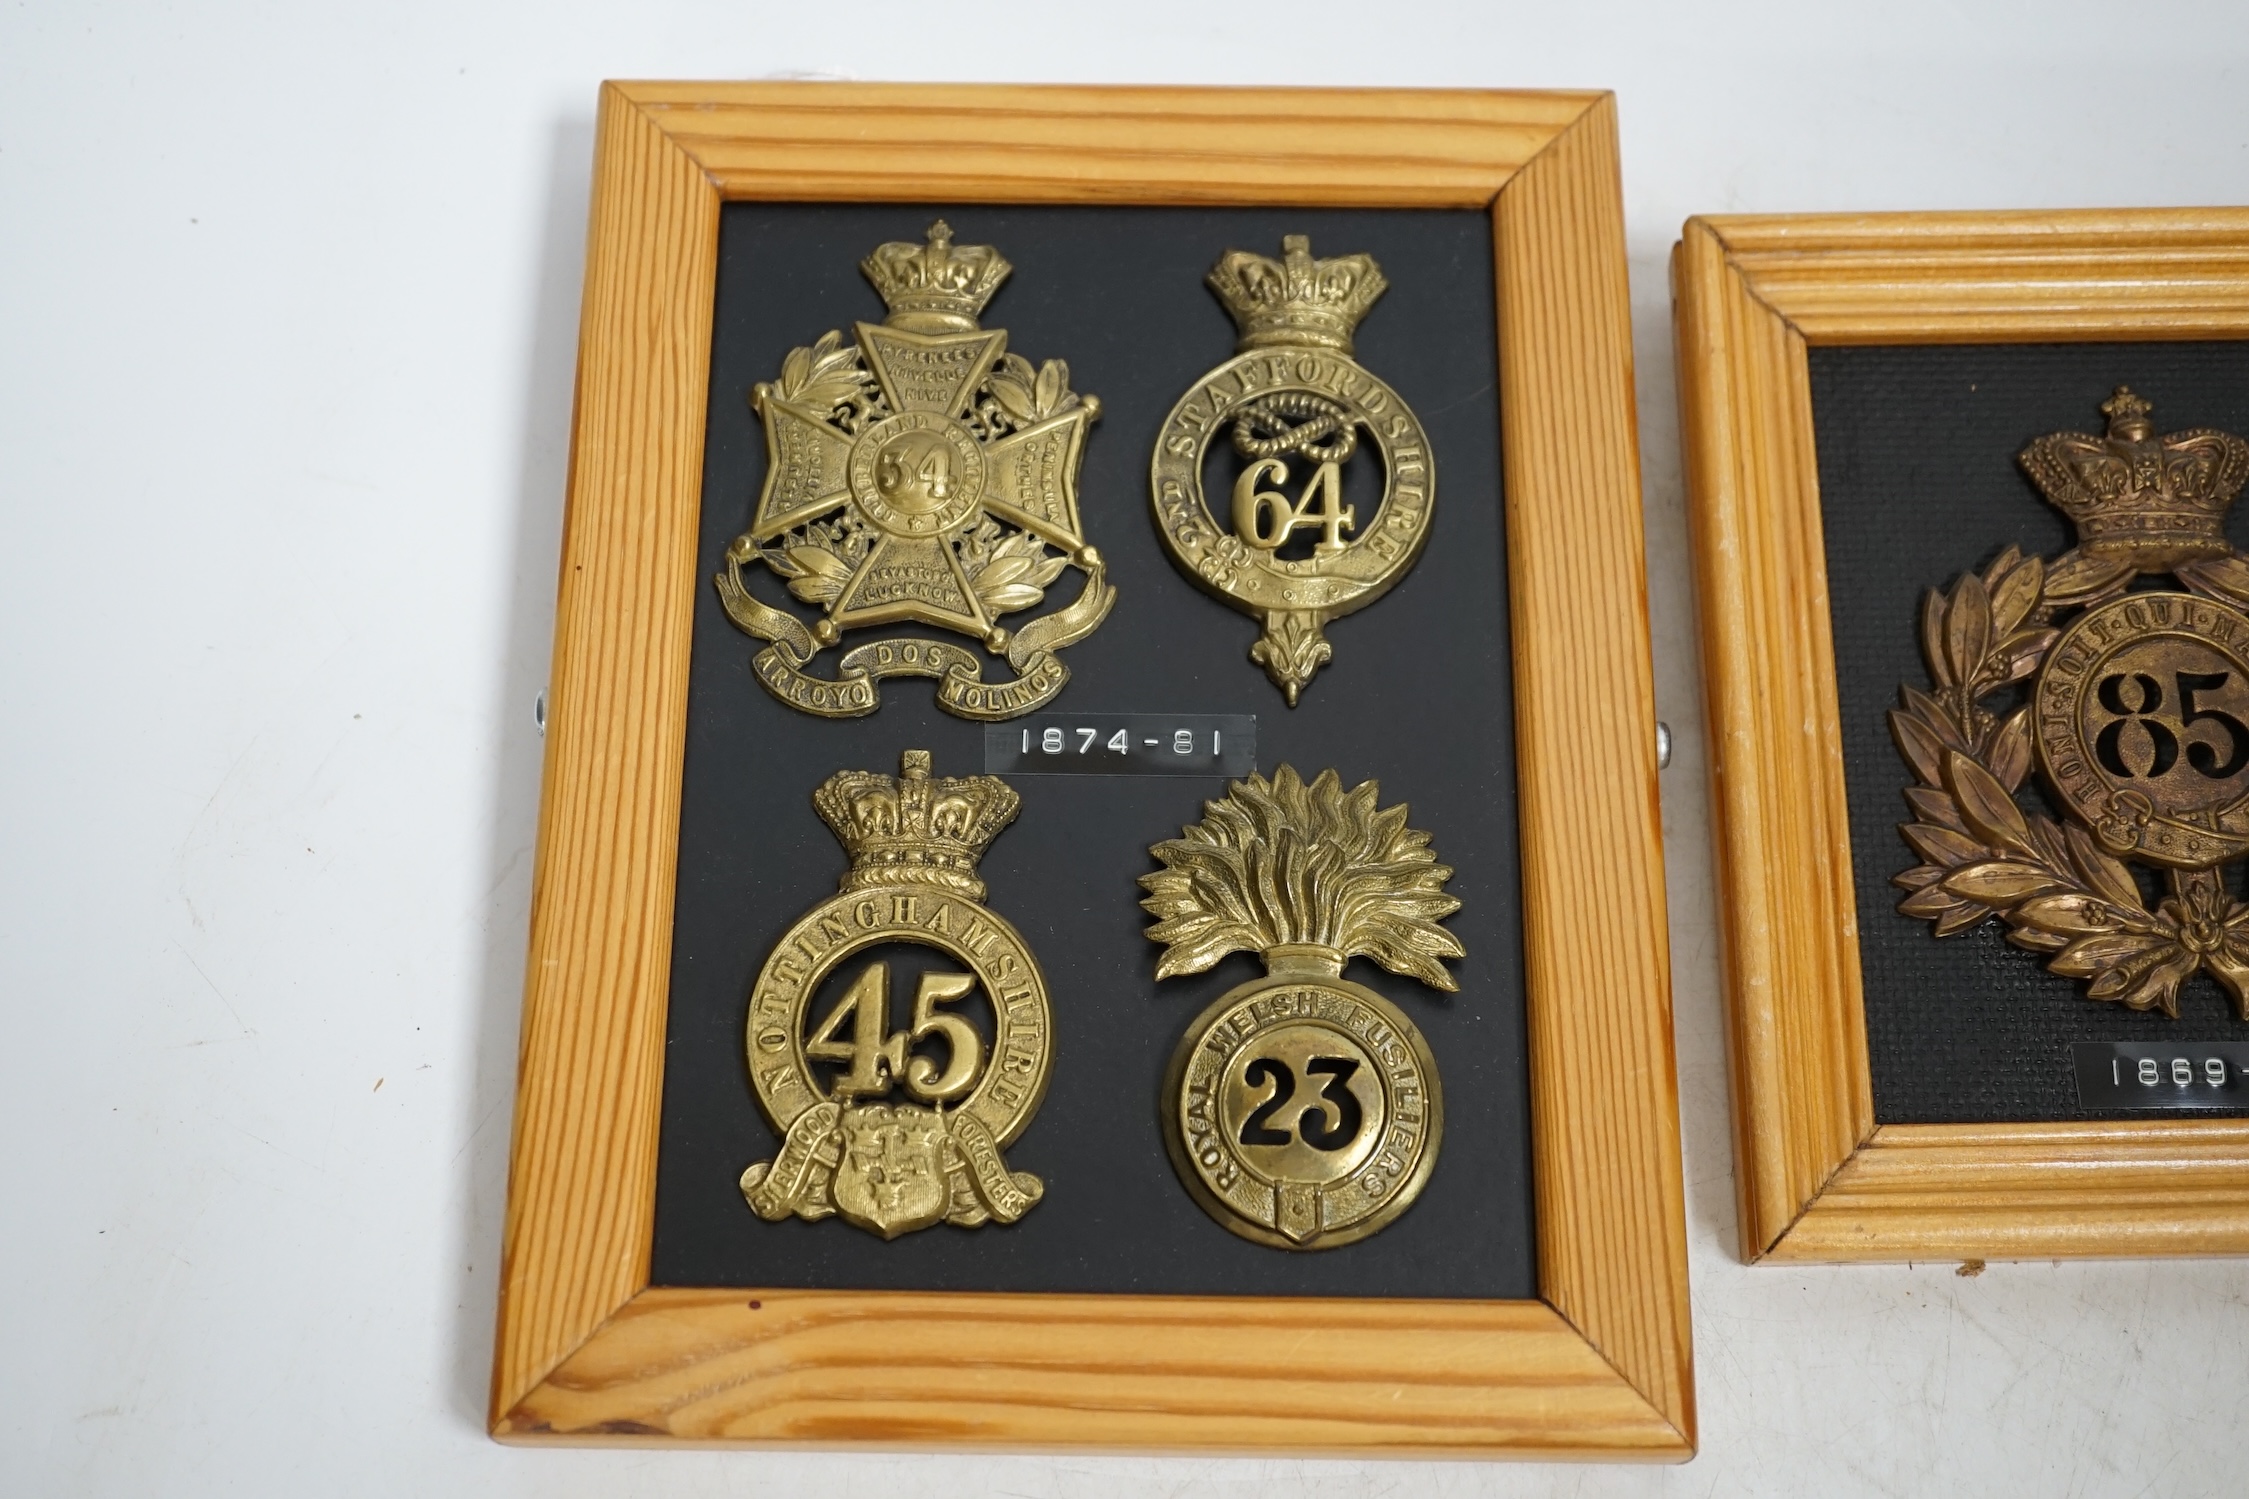 Five military helmet and shako plates mounted on two boards, including; the Nottinghamshire Regiment, the 2nd Staffordshire Regiment, the Royal Welsh Fusiliers, the Cumberland Regiment and the 85th King’s Light Infantry.